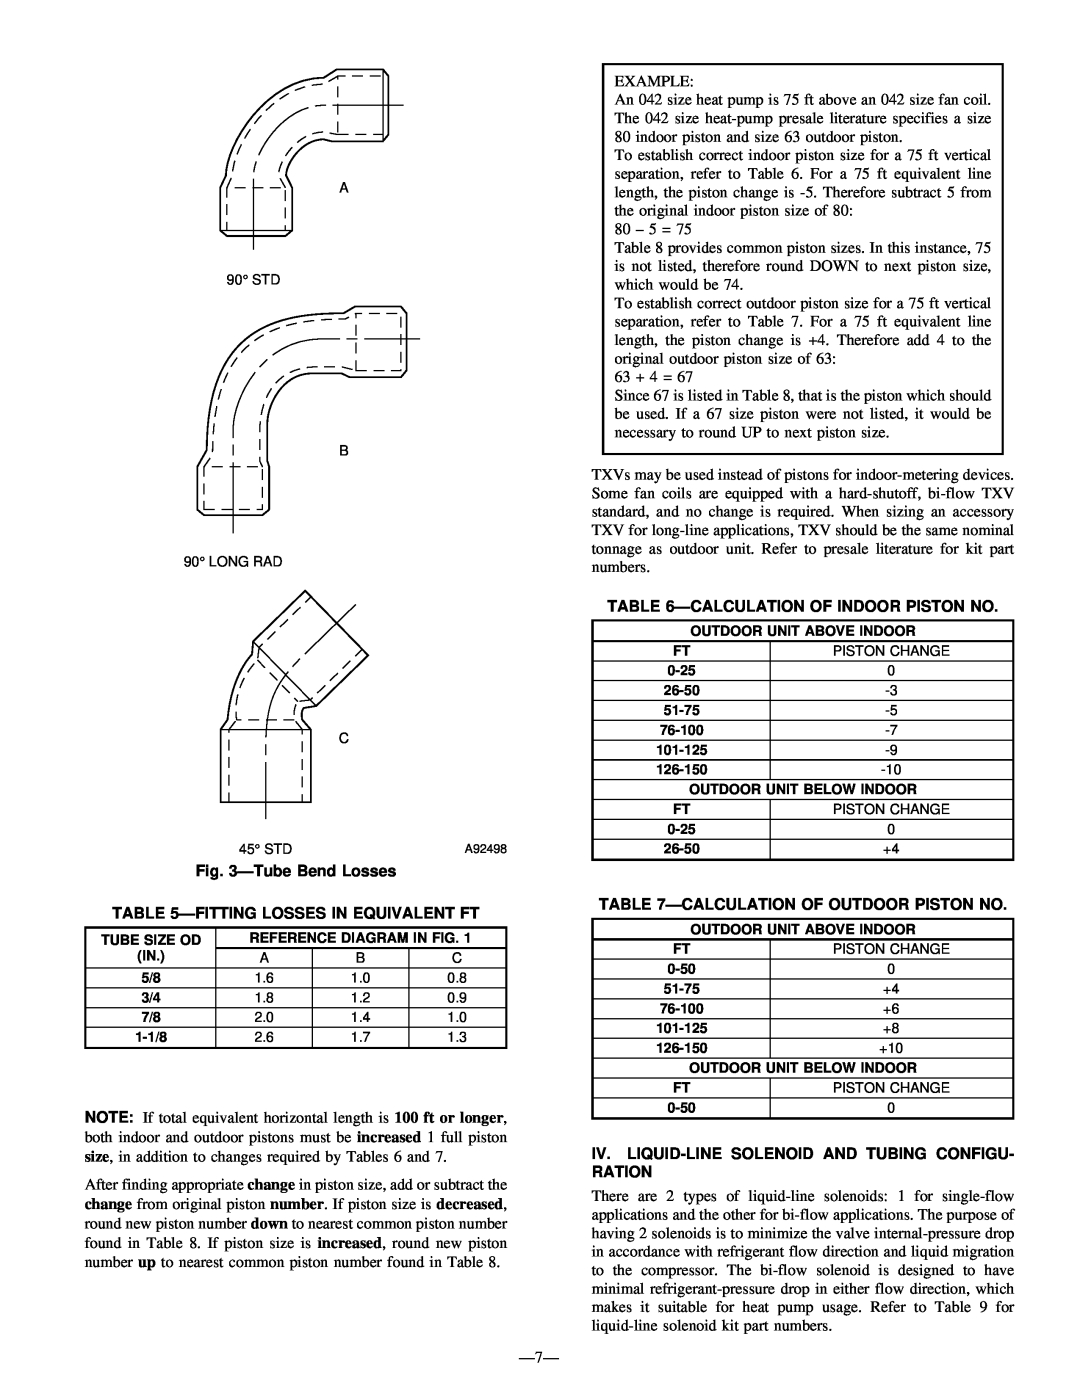 Bryant R-22 service manual TubeBend Losses, Fittinglosses In Equivalent Ft, Calculationof Indoor Piston No 